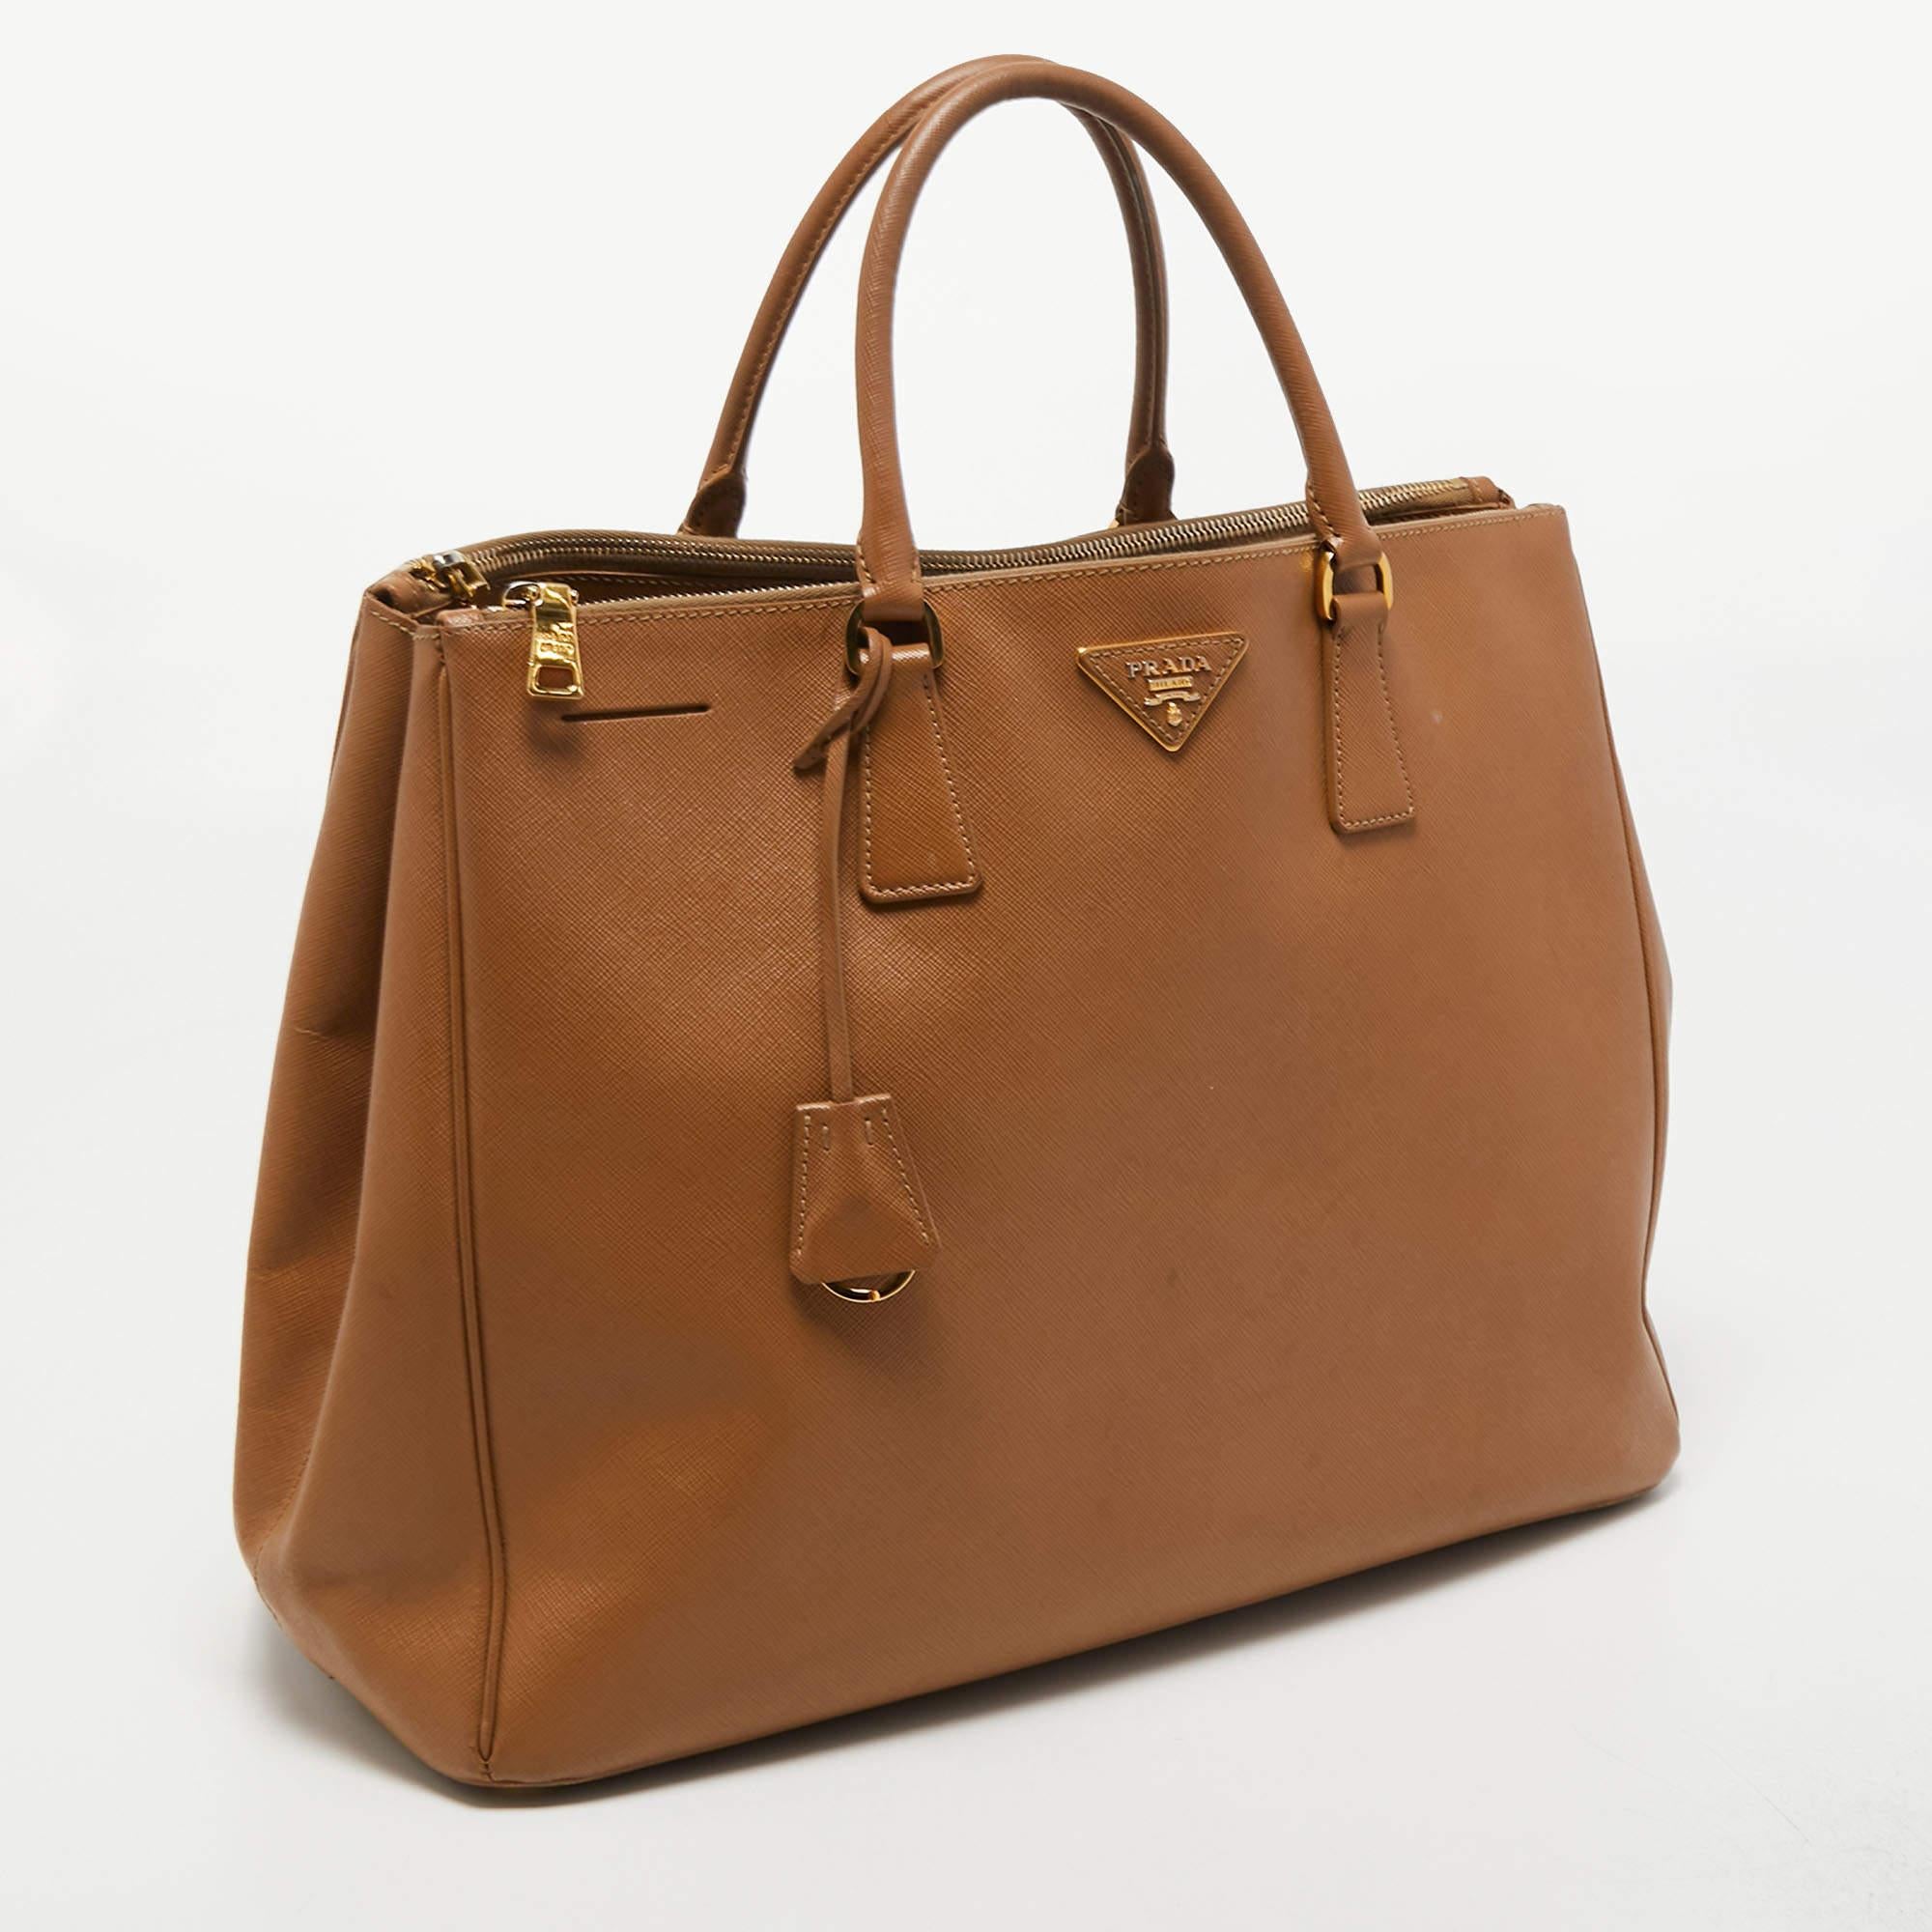 Women's Prada Brown Saffiano Leather Large Double Zip Tote